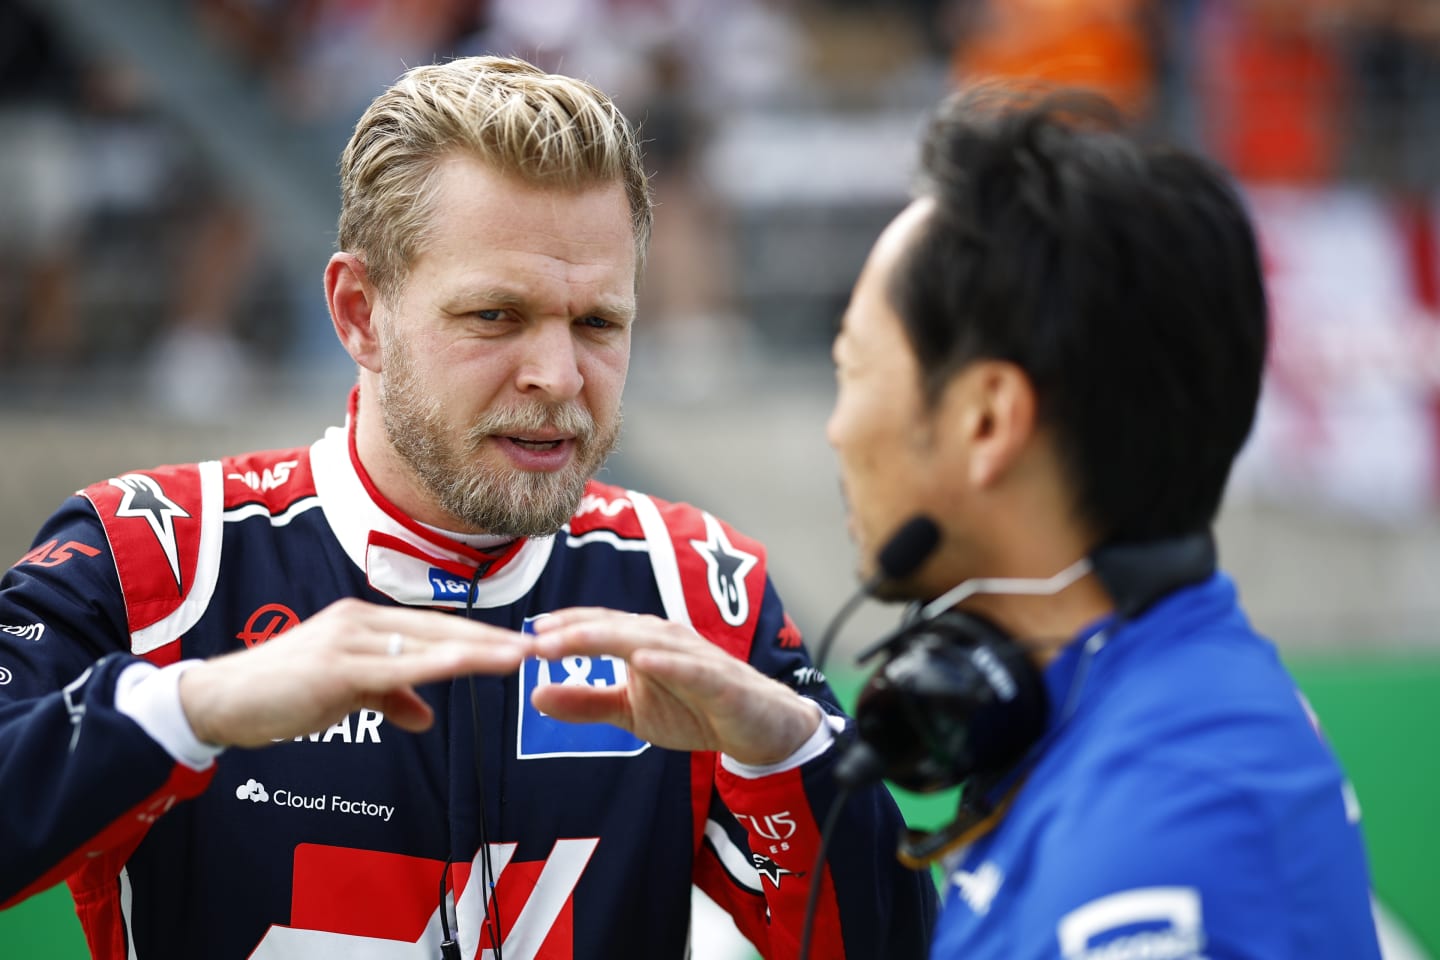 AUSTIN, TEXAS - OCTOBER 23: Kevin Magnussen of Denmark and Haas F1 talks with Ayao Komatsu on the grid during the F1 Grand Prix of USA at Circuit of The Americas on October 23, 2022 in Austin, Texas. (Photo by Chris Graythen/Getty Images)